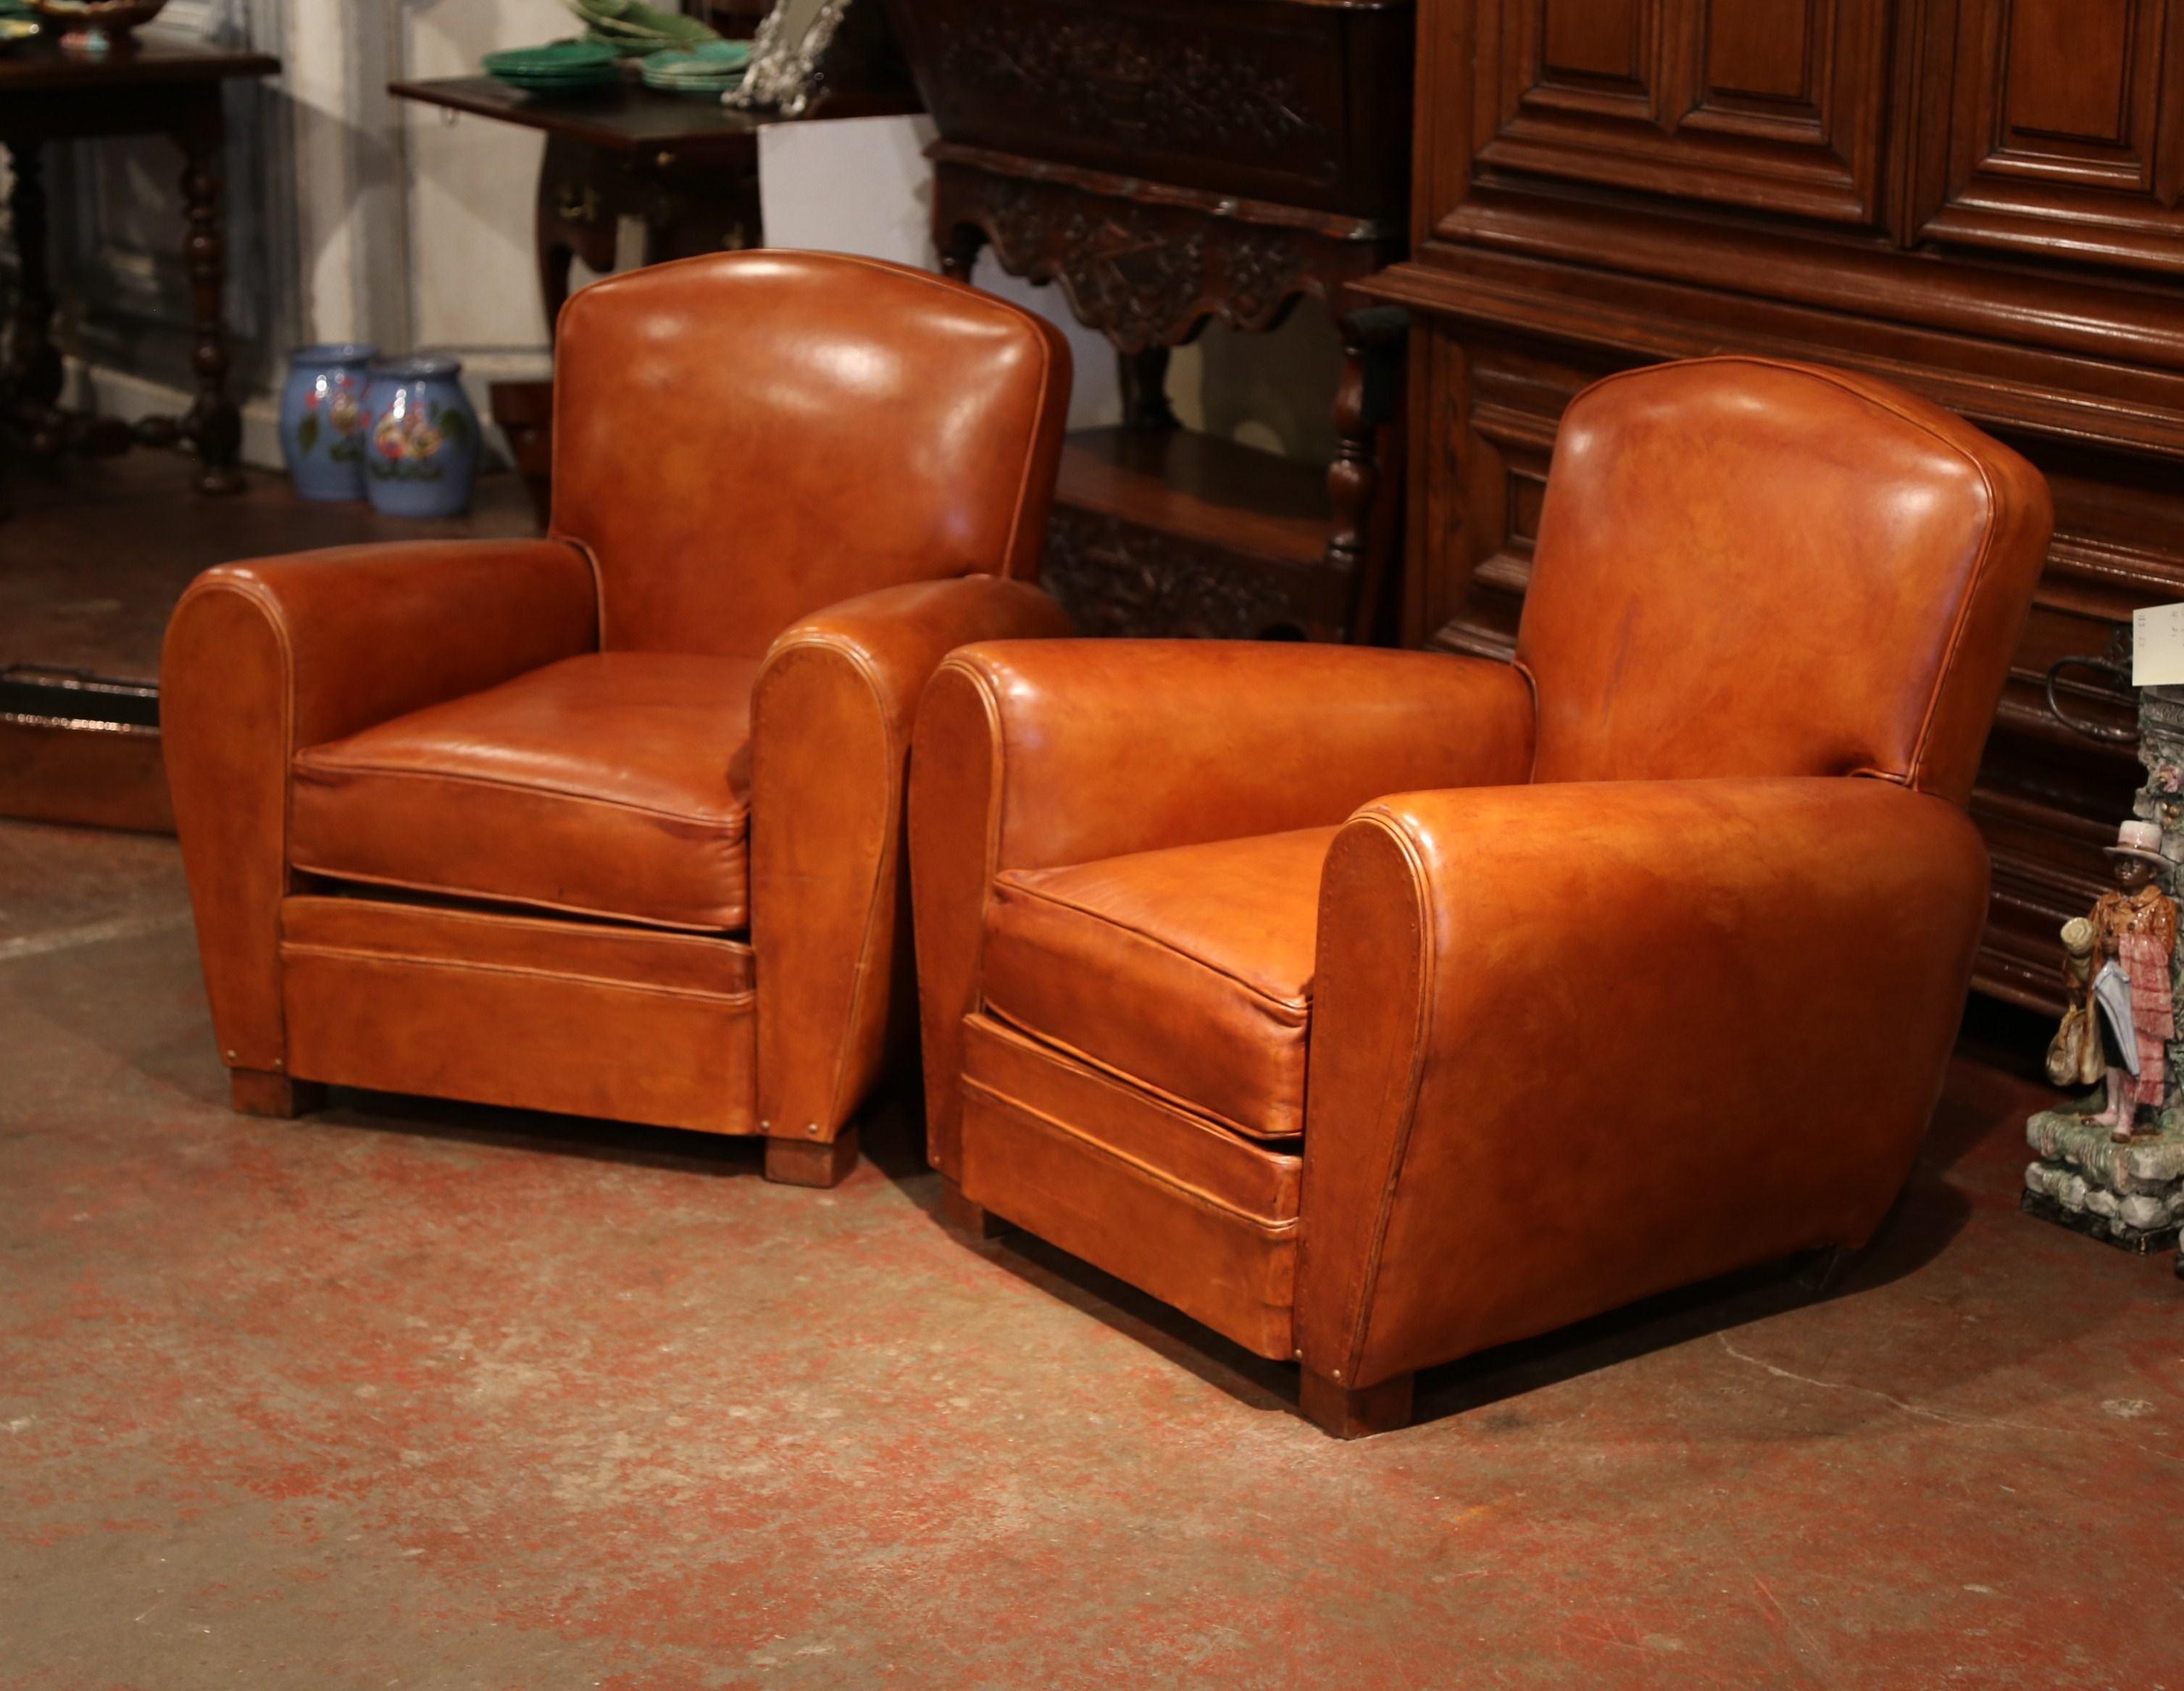 These Classic, antique Art Deco club chairs were crafted in France, circa 1920. The stately, masculine chairs feature wide, rounded armrests, a pitch back with an arched top shape, and square wooden feet at the base. The Classic, masculine French